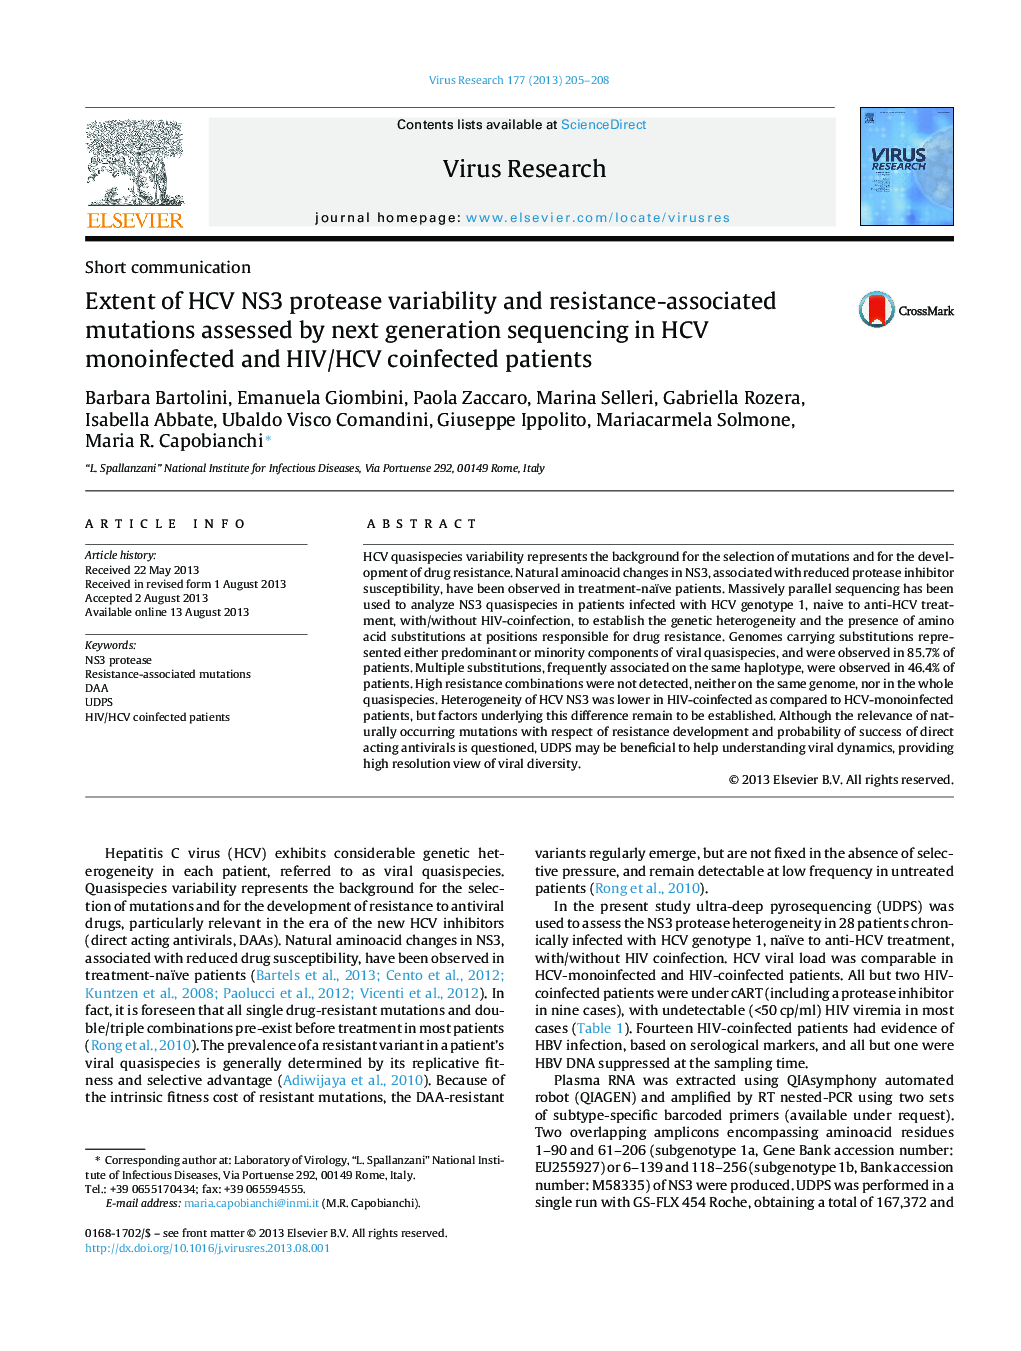 Extent of HCV NS3 protease variability and resistance-associated mutations assessed by next generation sequencing in HCV monoinfected and HIV/HCV coinfected patients